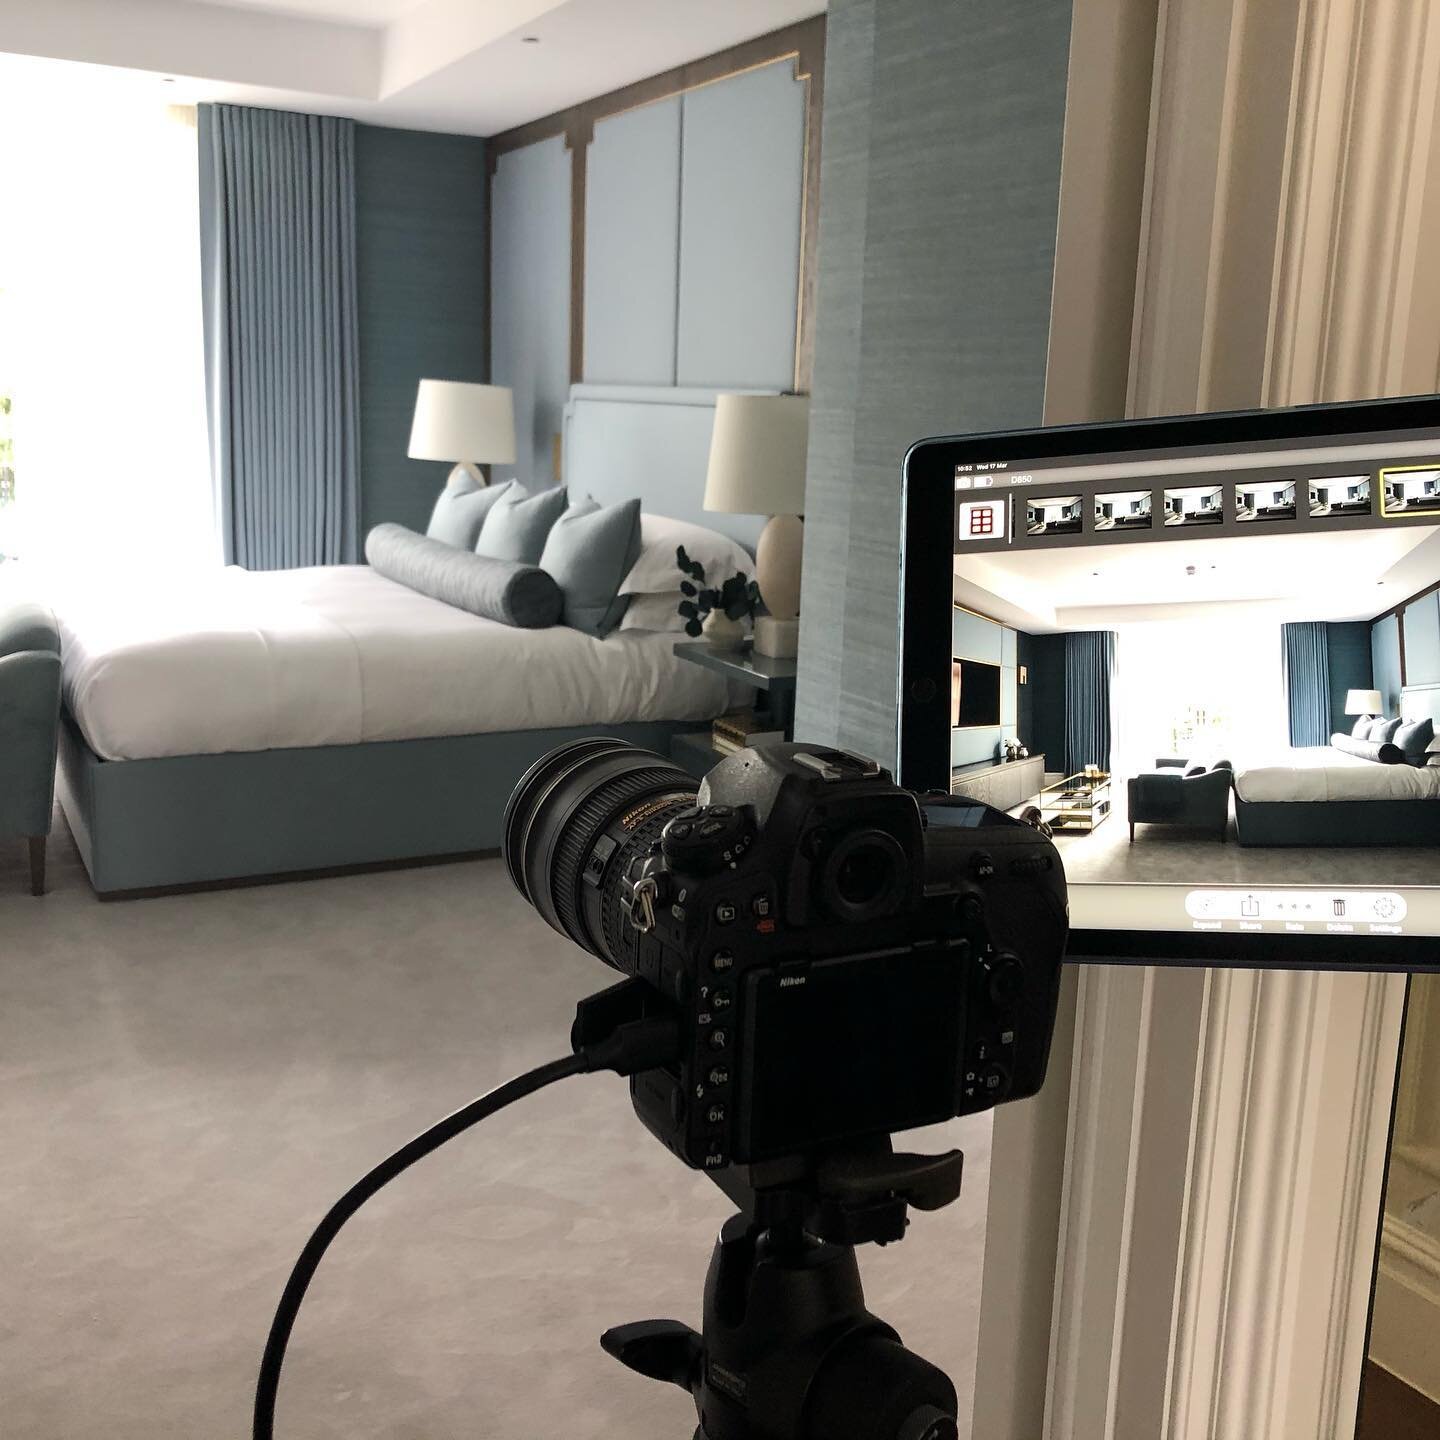 Photoshoot day is finally here 🙌 Enjoying capturing this beauty of a house on camera with @jodystewartphotography .
.
.
#interiordesign #livingthedream #londonlife #interiorstyling #primeresi #hampsteadheath